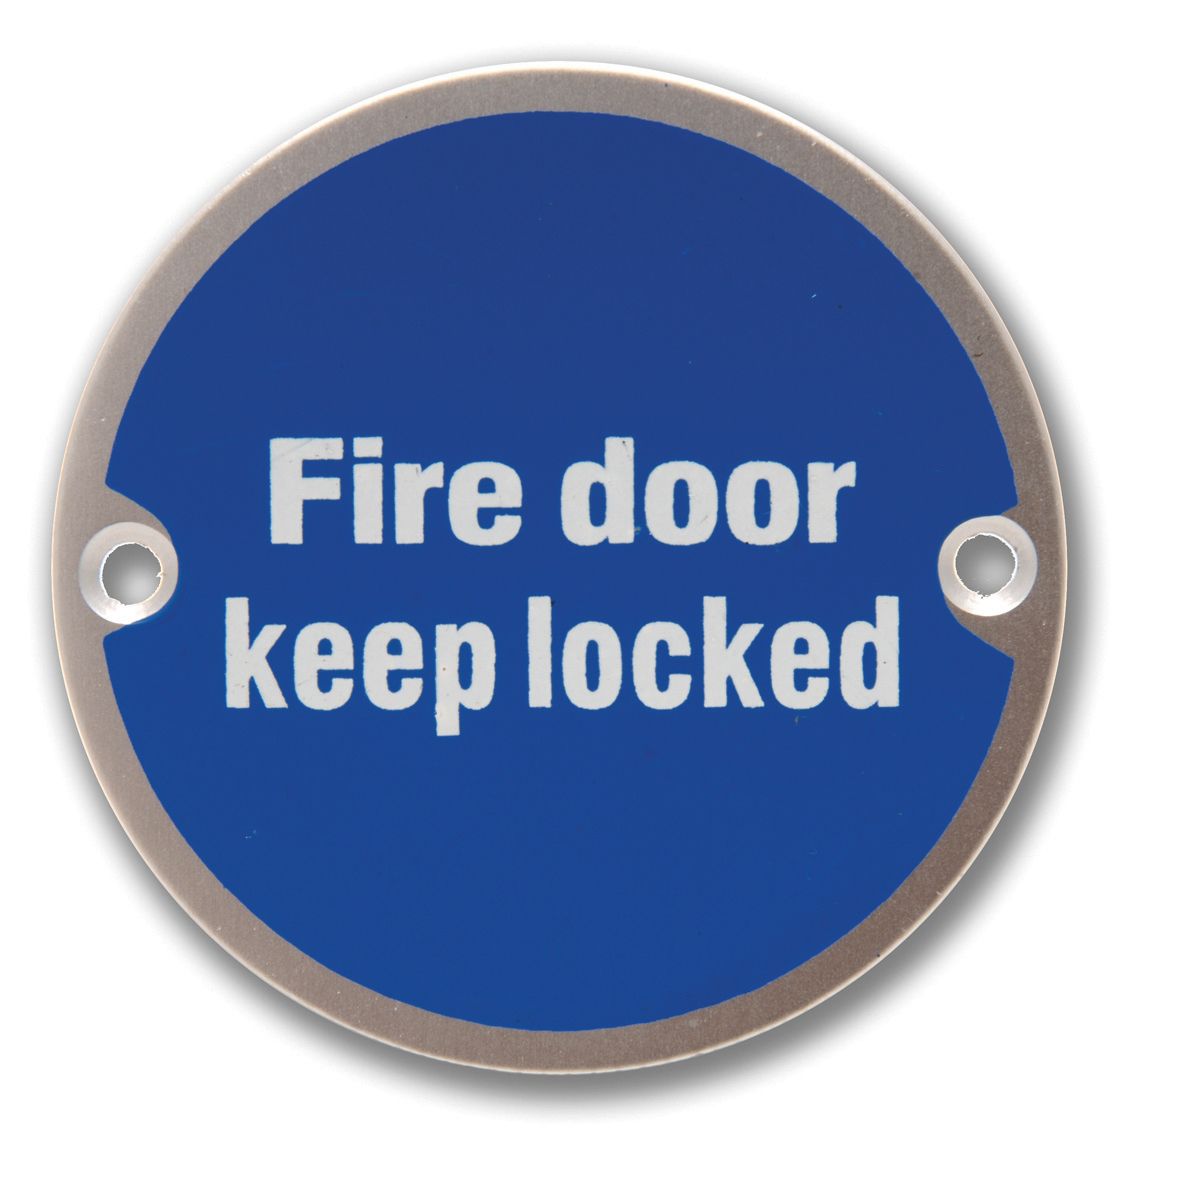 4FireDoors Fire Door Keep Locked Safety Sign - 75mm - Pack of 2